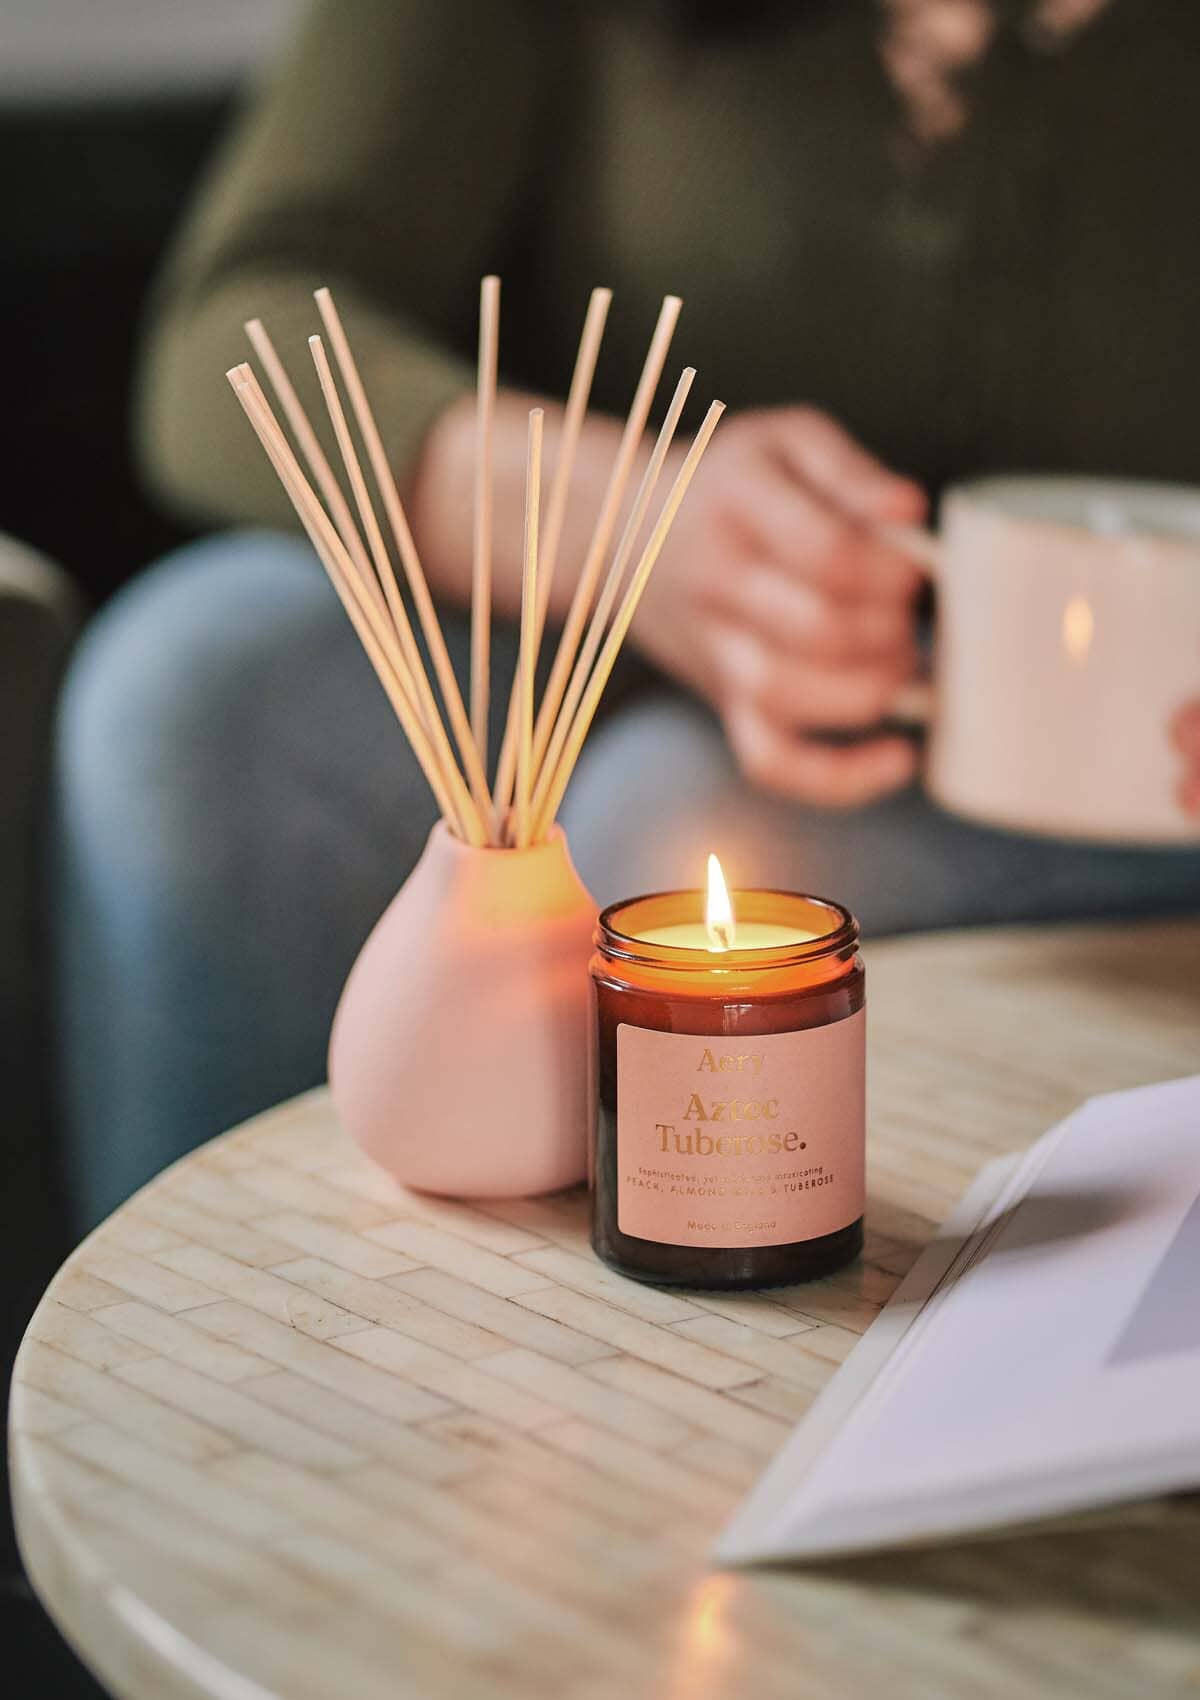 Pink Aztec tuberose jar candle by aery displayed next to aztec tuberose diffuser by aery placed on cream table 